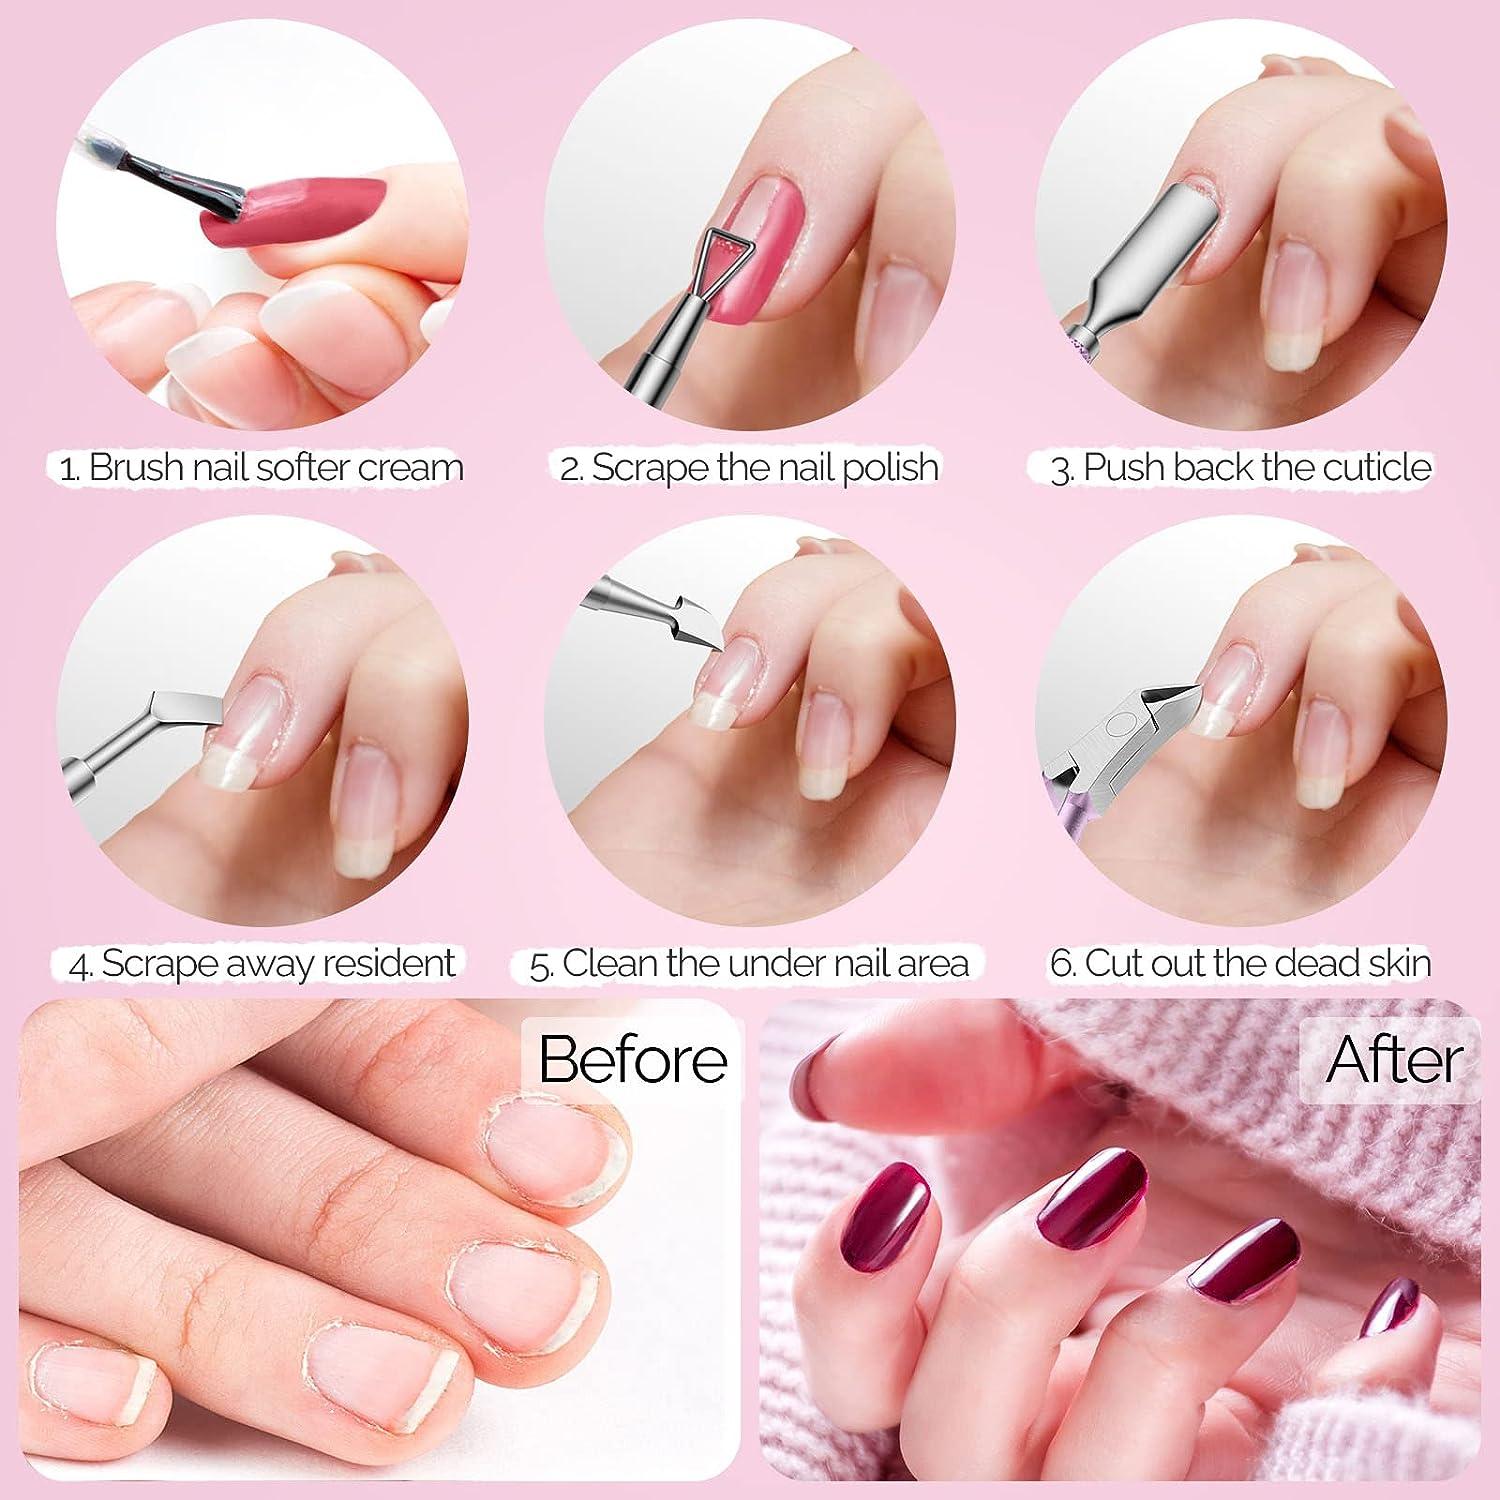 Cutting Off the Nails Cuticle by Nail Scissors in Professional Nail Salon.  Beautiful Female Nails and Manicure. Stock Image - Image of macro, girl:  121796131